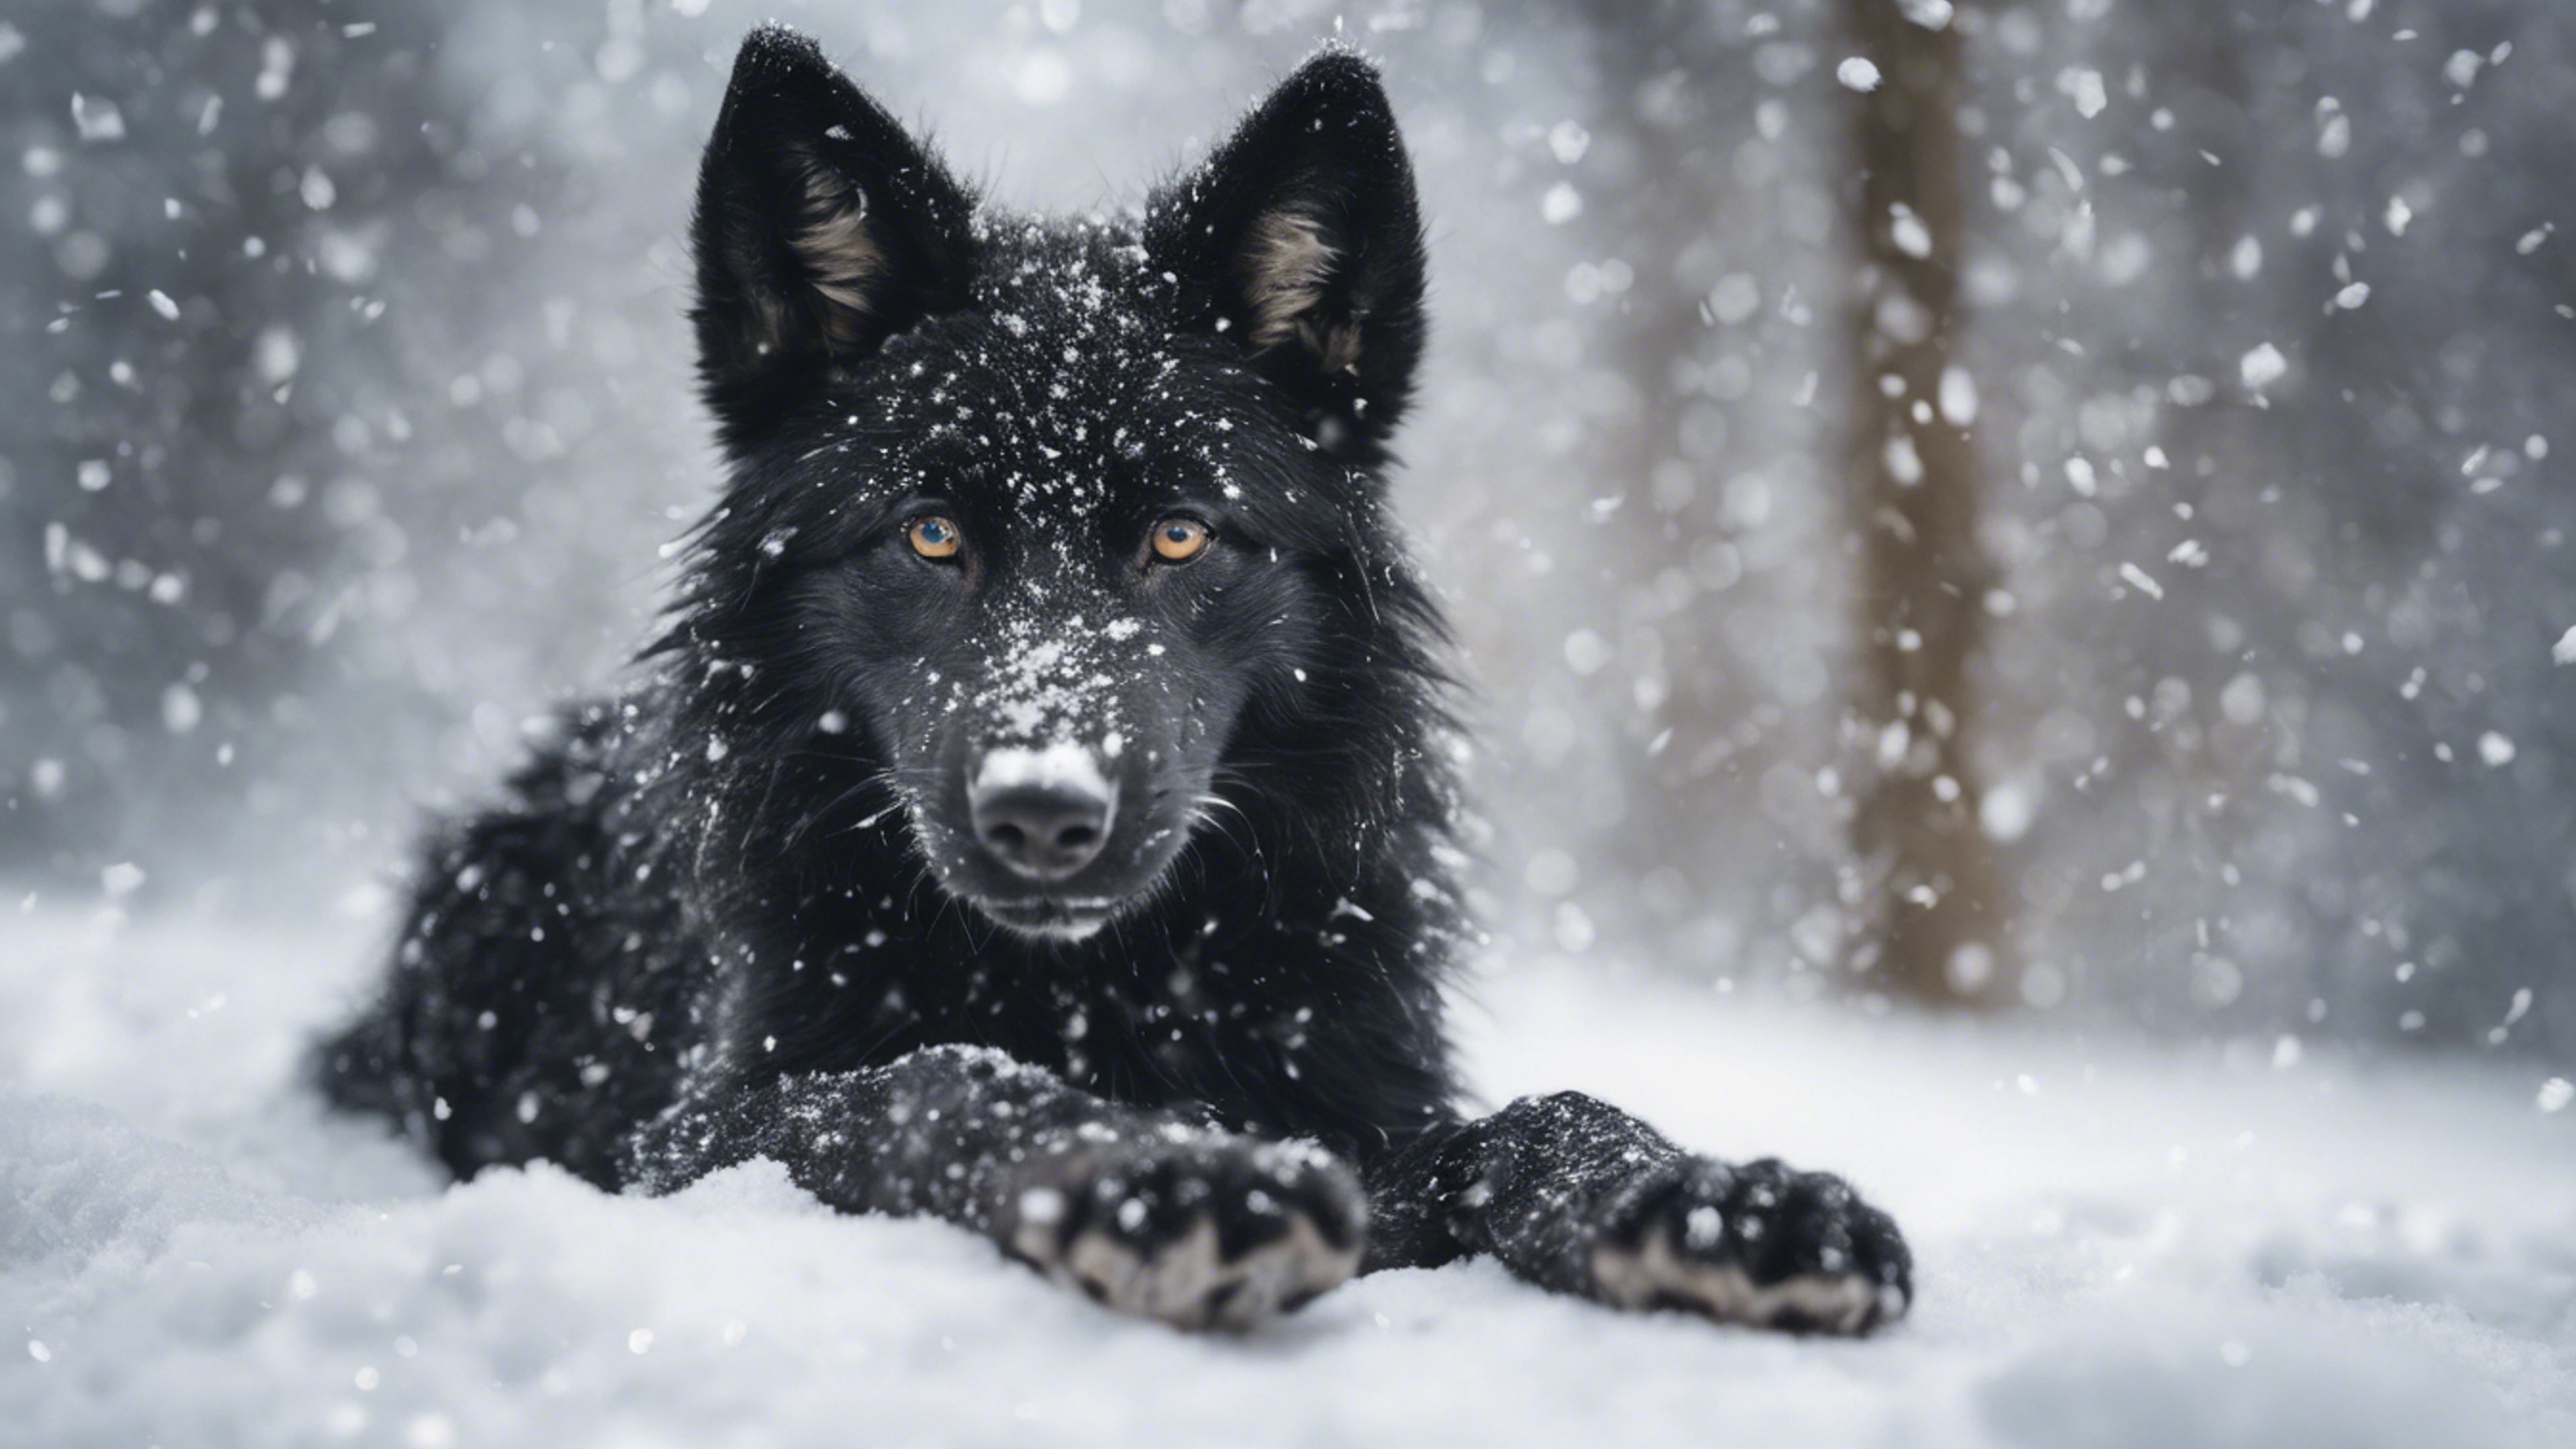 A playful black wolf puppy making the first snow angel of its life. Tapet[6a2907d16c81420c9dae]